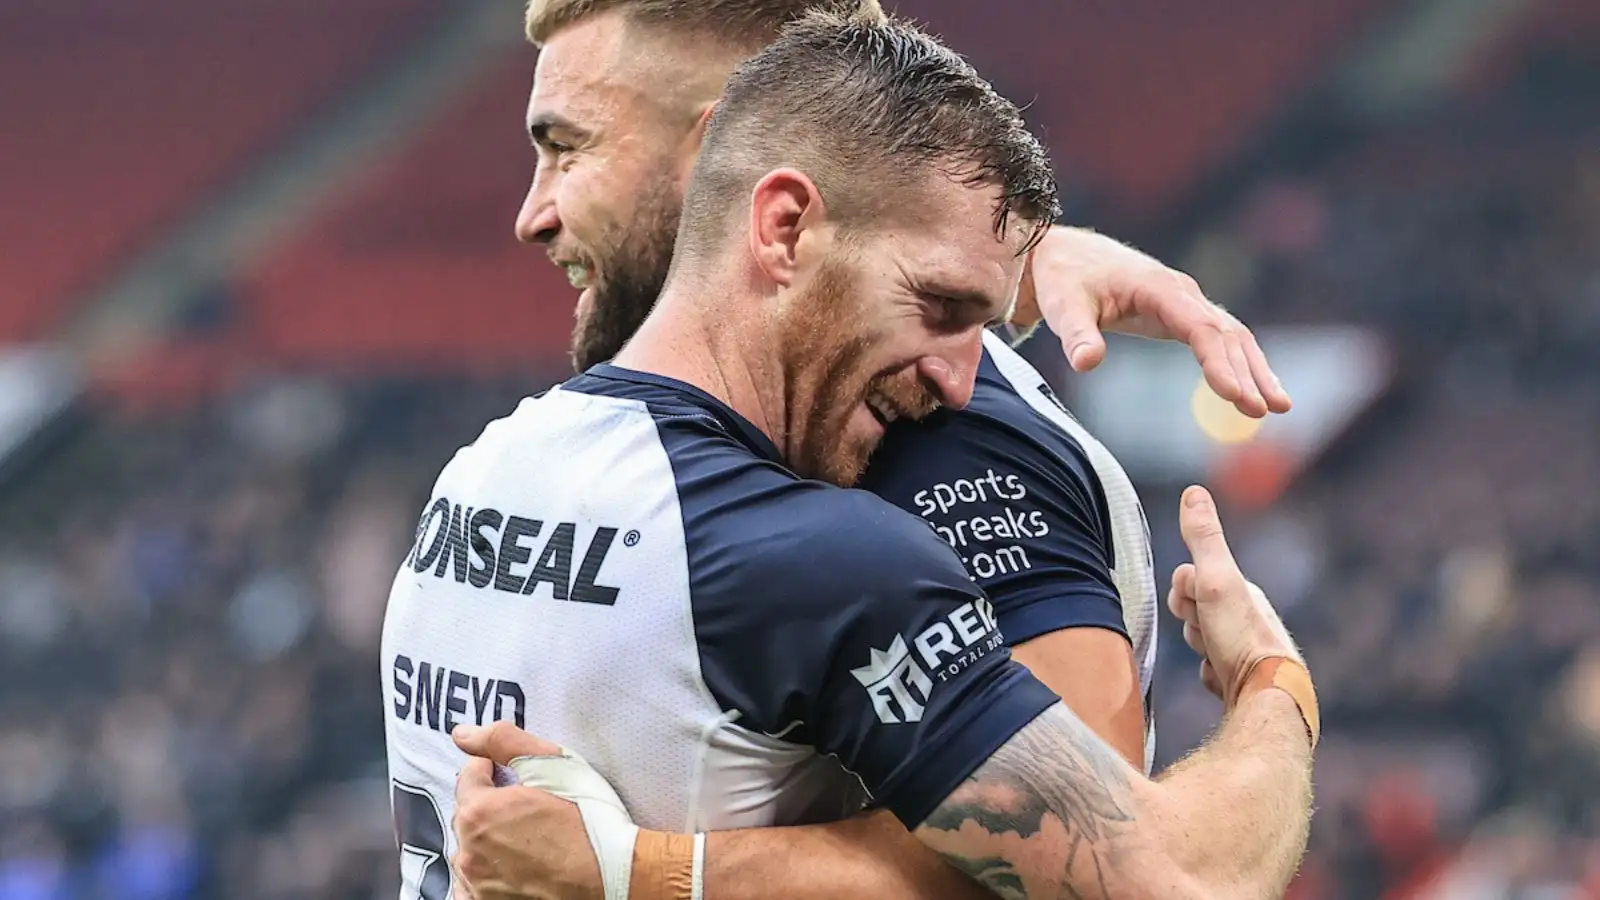 Marc Sneyd makes classy gesture to his former community club